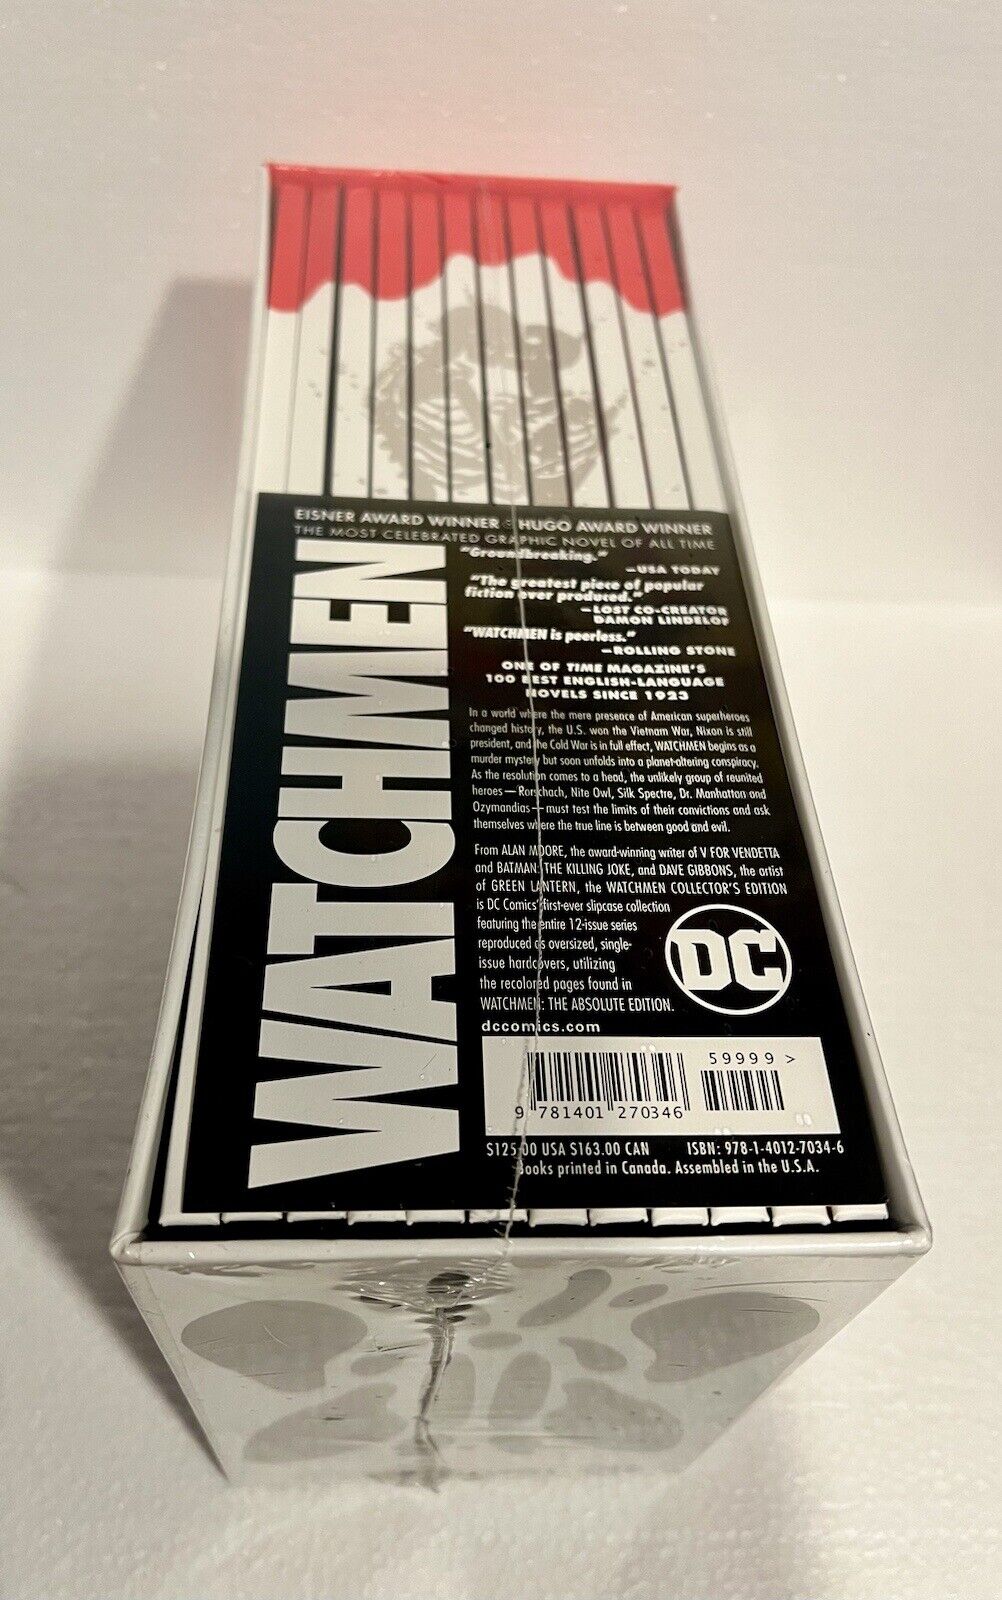 Watchmen: The Absolute Edition 12 Volume Graphic Novels DC (Sealed - Brand New)